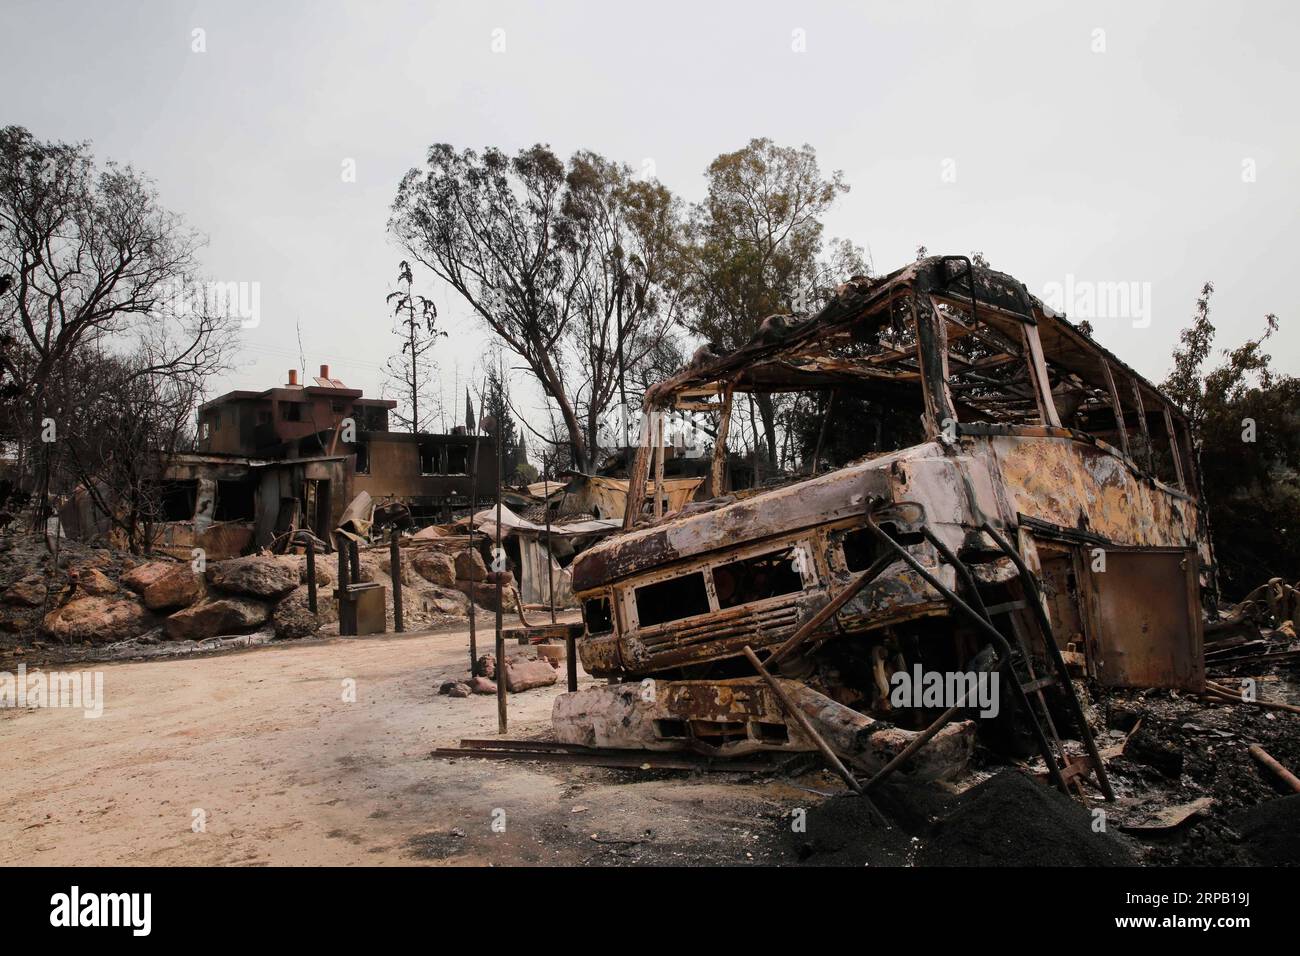 (190524) -- MEVO MODI IM, May 24, 2019 -- Photo taken on May 24, 2019 shows a burnt-down vehicle following a fire amidst extreme heat wave in the village of Mevo Modi im, Israel. The Israeli government said it is asking for international aid to fight dozens of huge fires that broke out on Thursday because of extreme hot weather of more than 40 degrees Celsius. ) ISRAEL-MEVO MODI IM-FIRE-DAMAGE GilxCohenxMagen PUBLICATIONxNOTxINxCHN Stock Photo